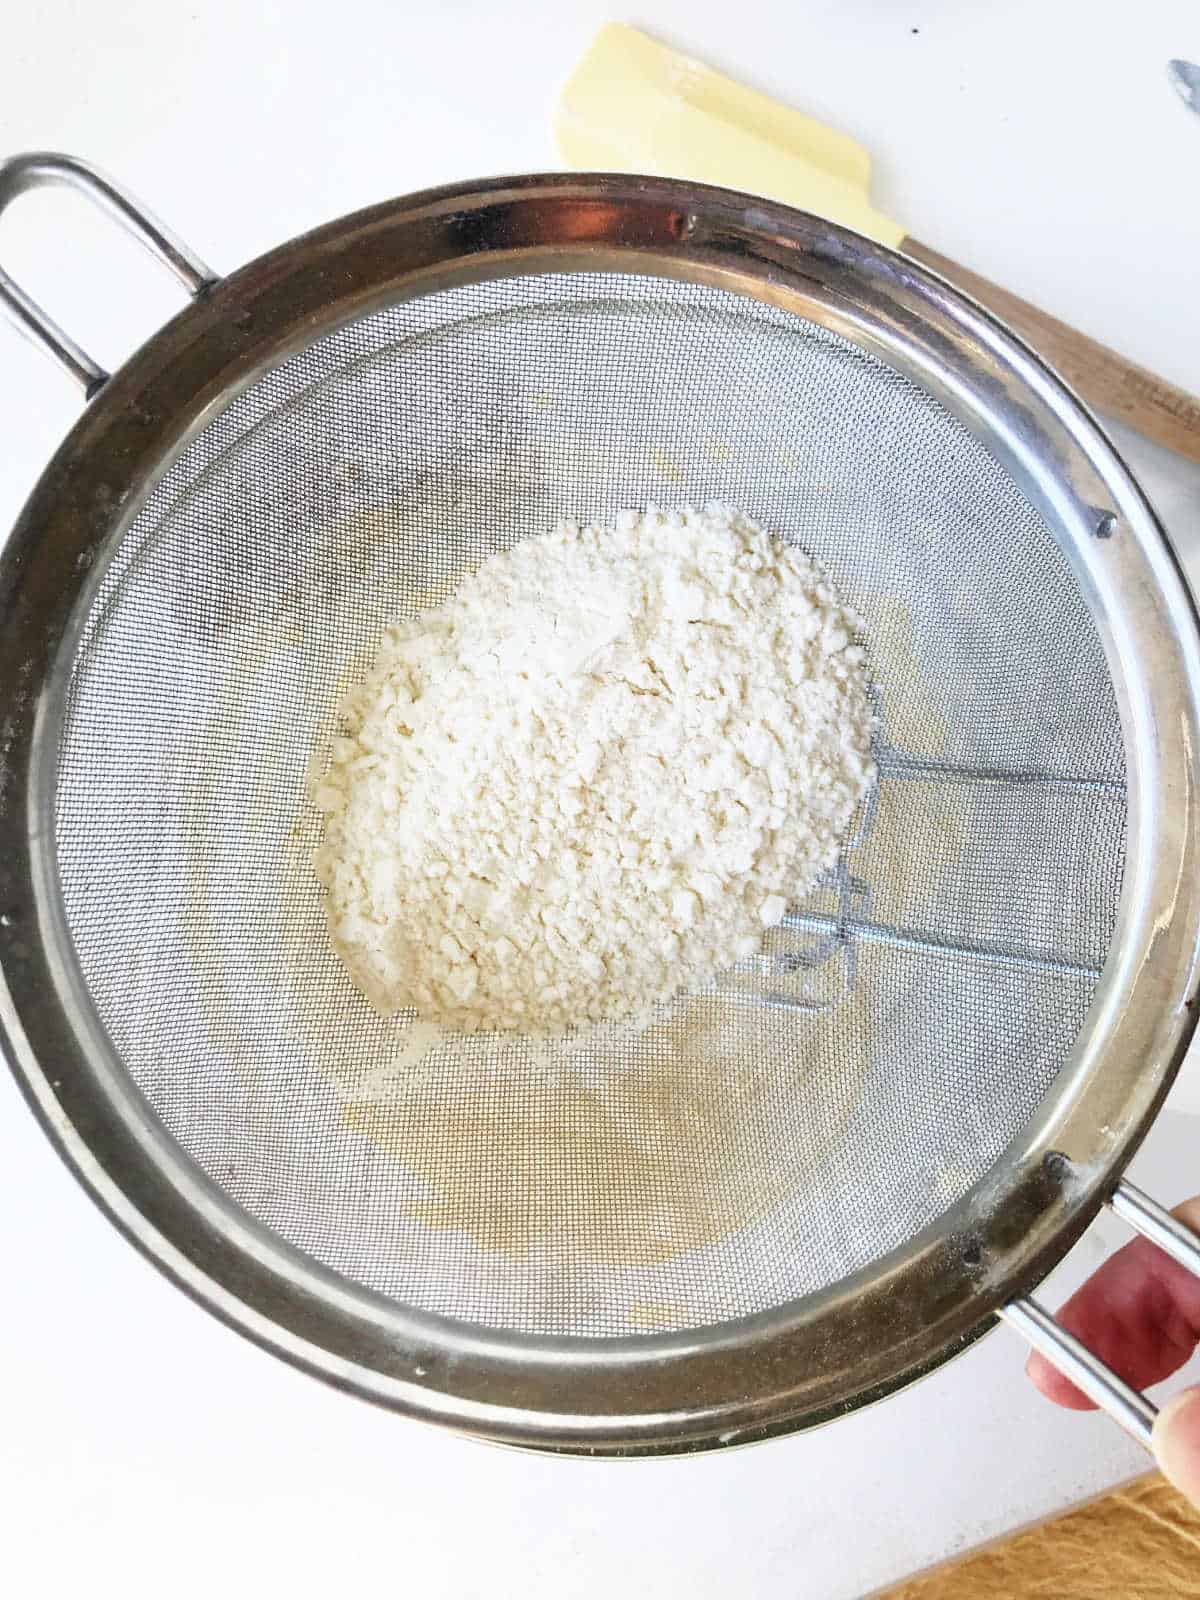 Sifter with flour mixture seen from above. White surface below.